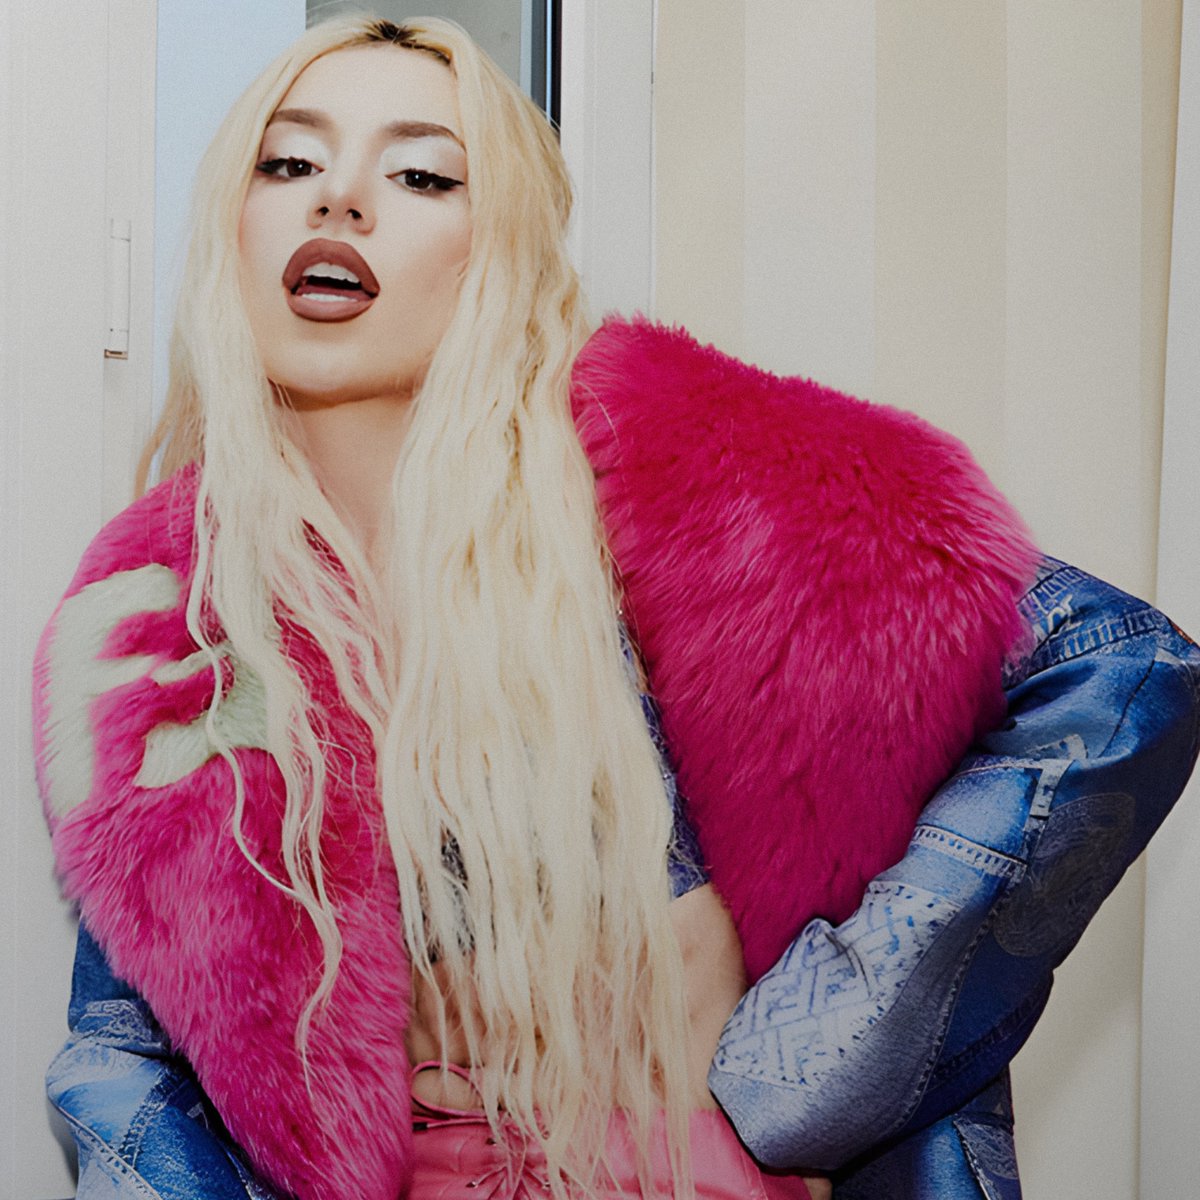 Ava Max - on the cover of Obsessed (UHD)

[Enhanced]

#AvaMax #ChooseYourFighter